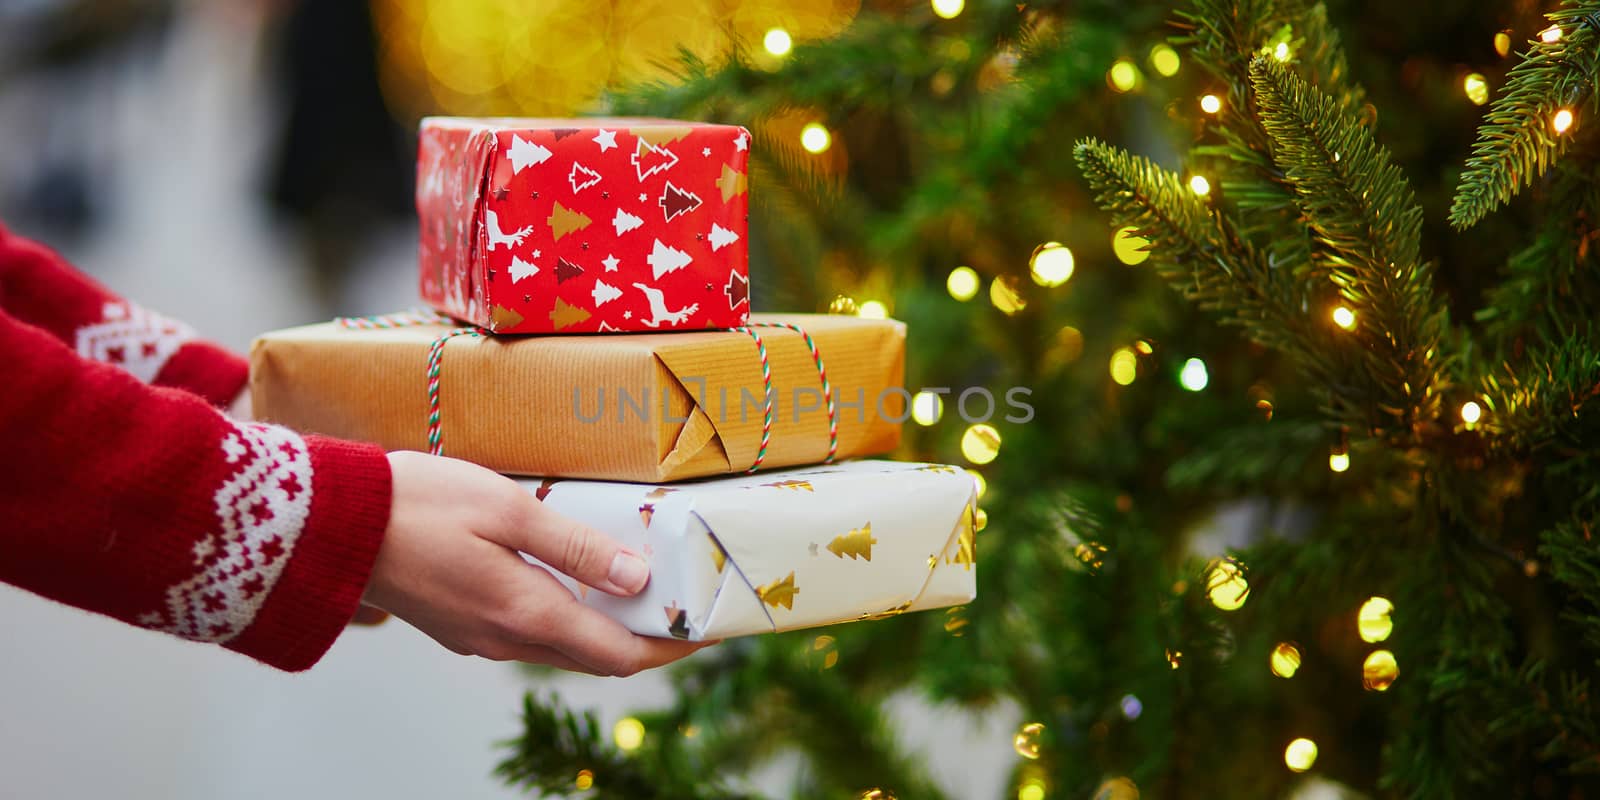 Woman hands holding pile of Christmas presents near New year tree decorated with lights and beads